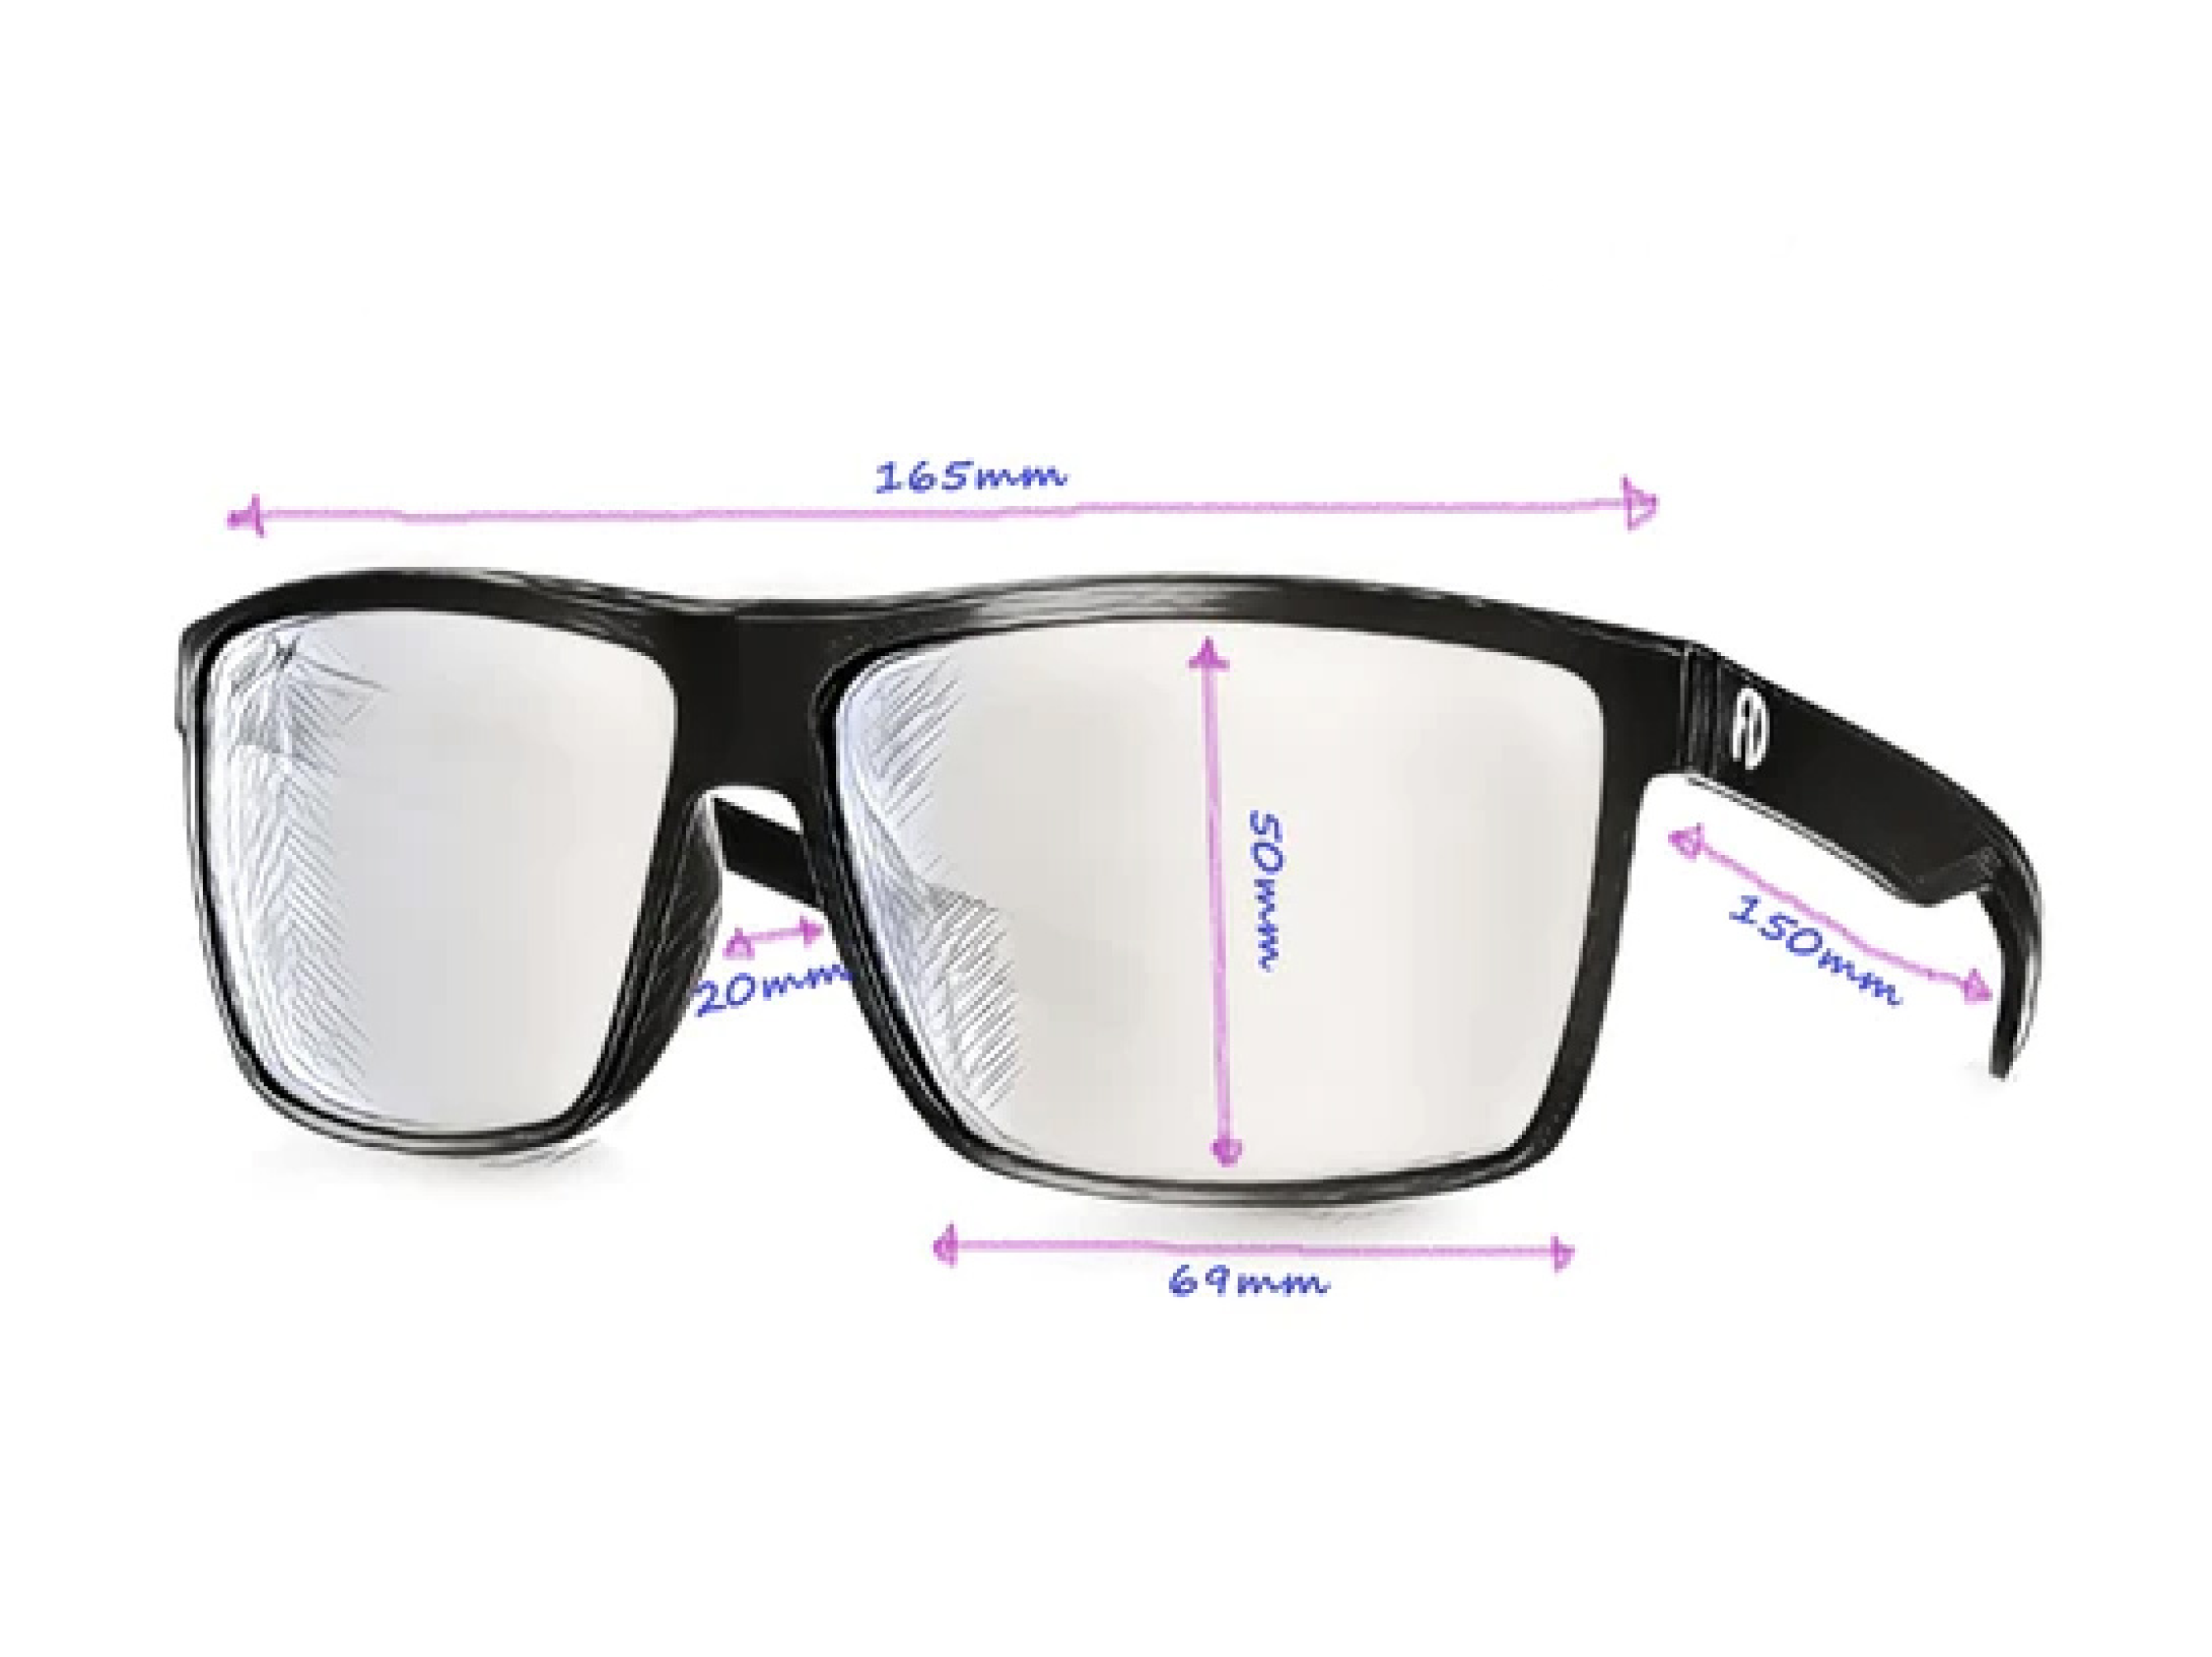 XXL SPORT (165mm) Extra Wide Sunglasses for Big Heads – Faded Days UK